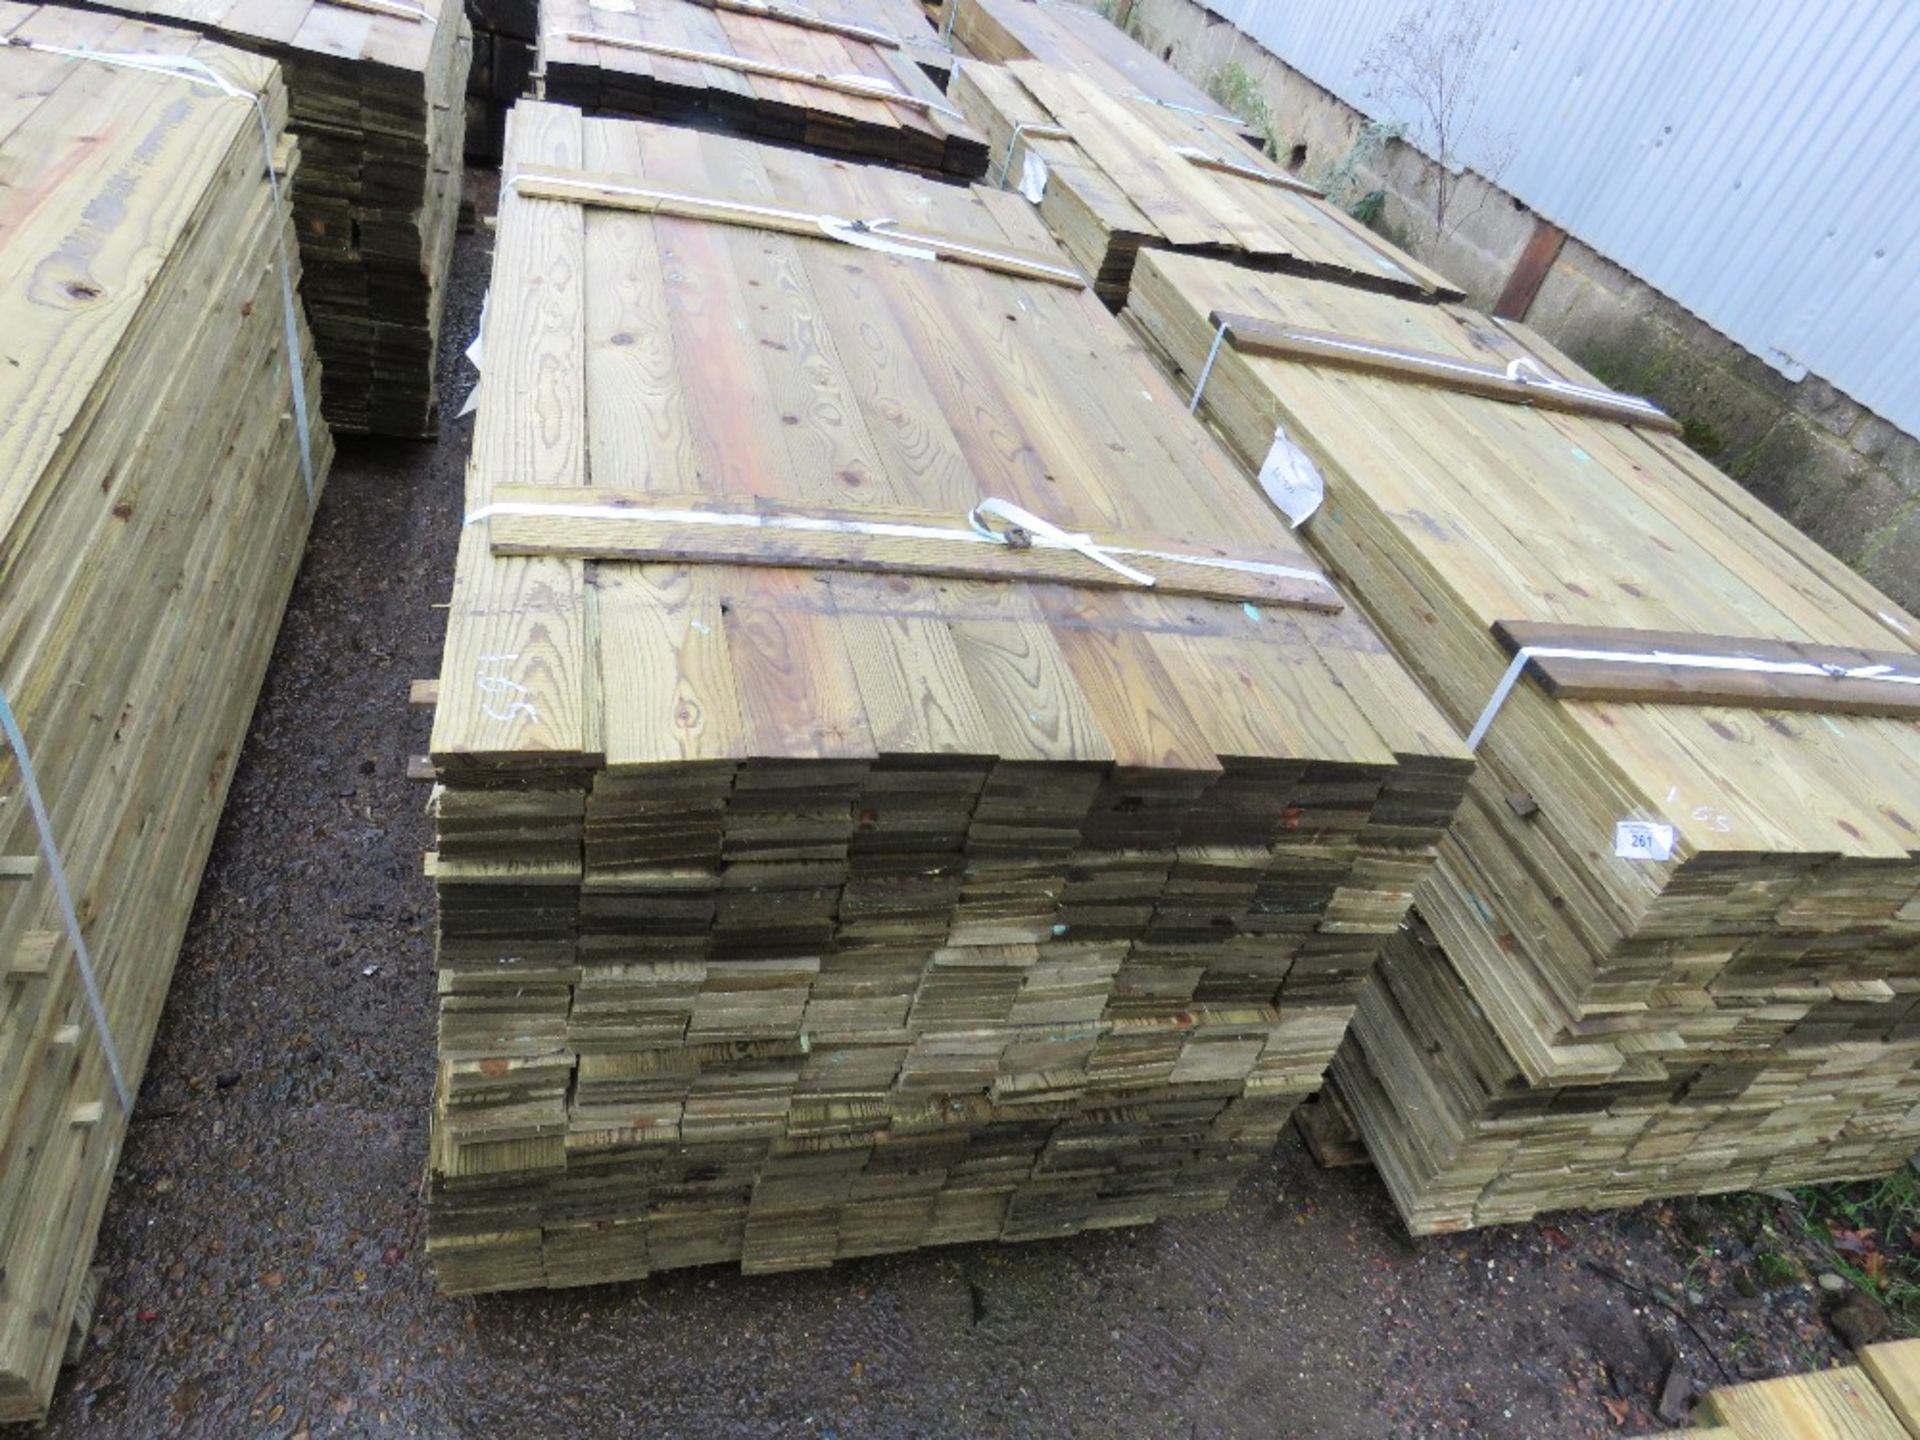 LARGE PACK OF FEATHER EDGE TIMBER FENCE CLADDING. 1.65M LENGTH X 10.5CM WIDTH APPROX.